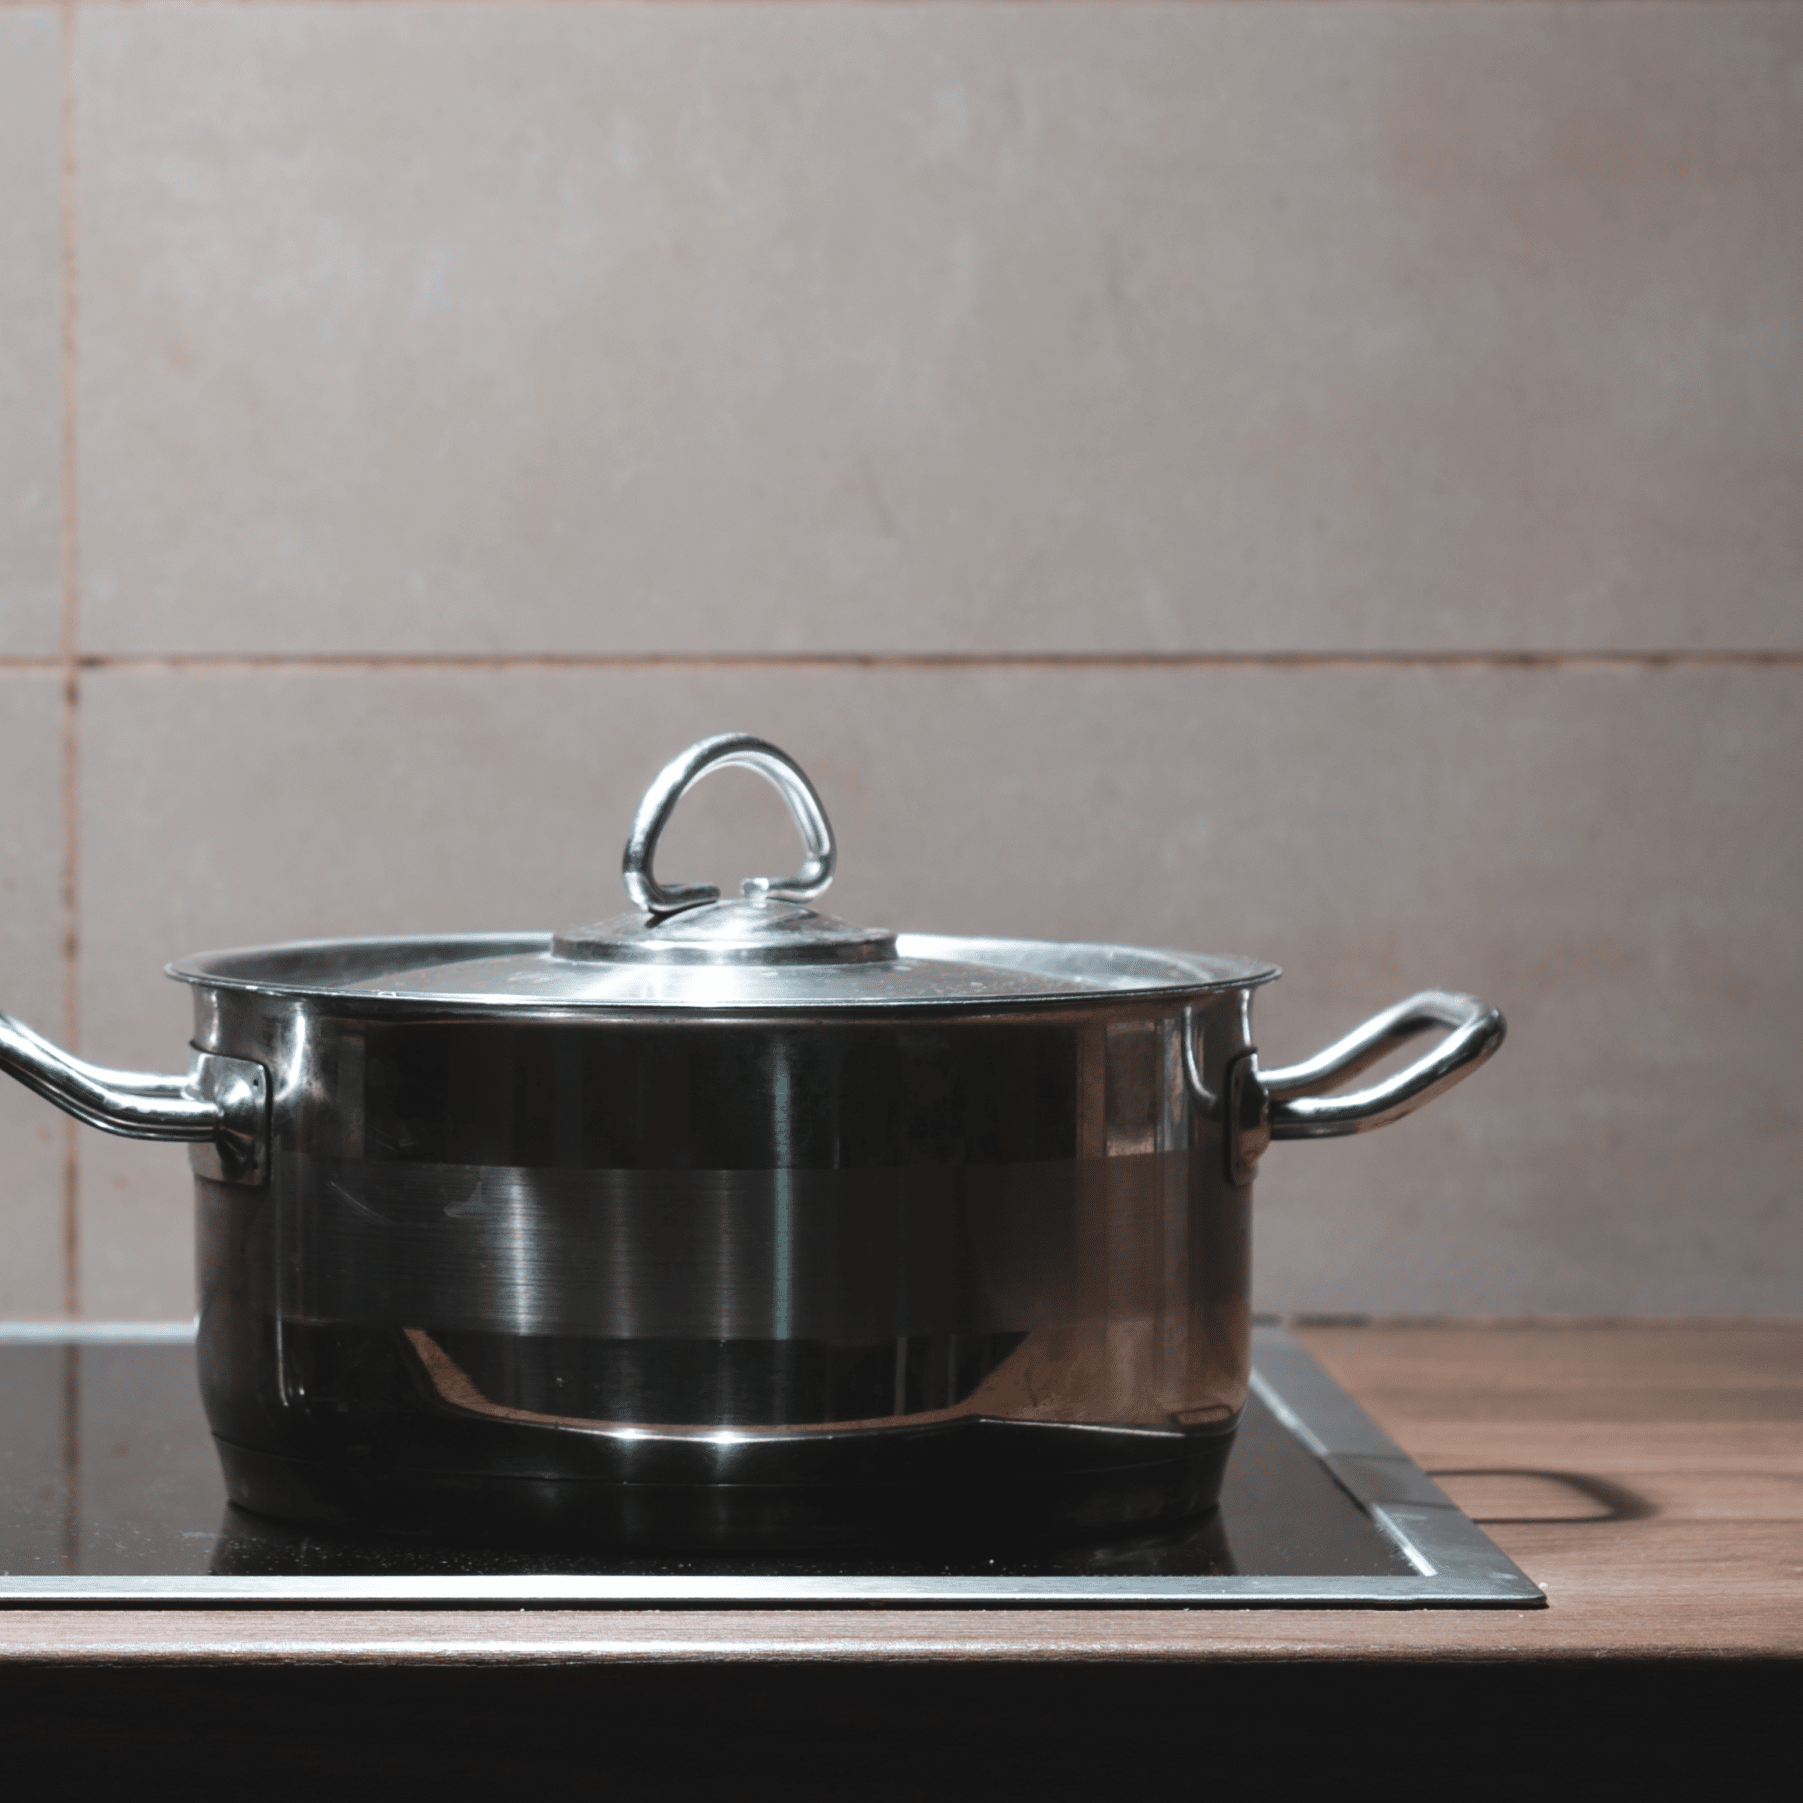 pot cooking on a commercial induction hob